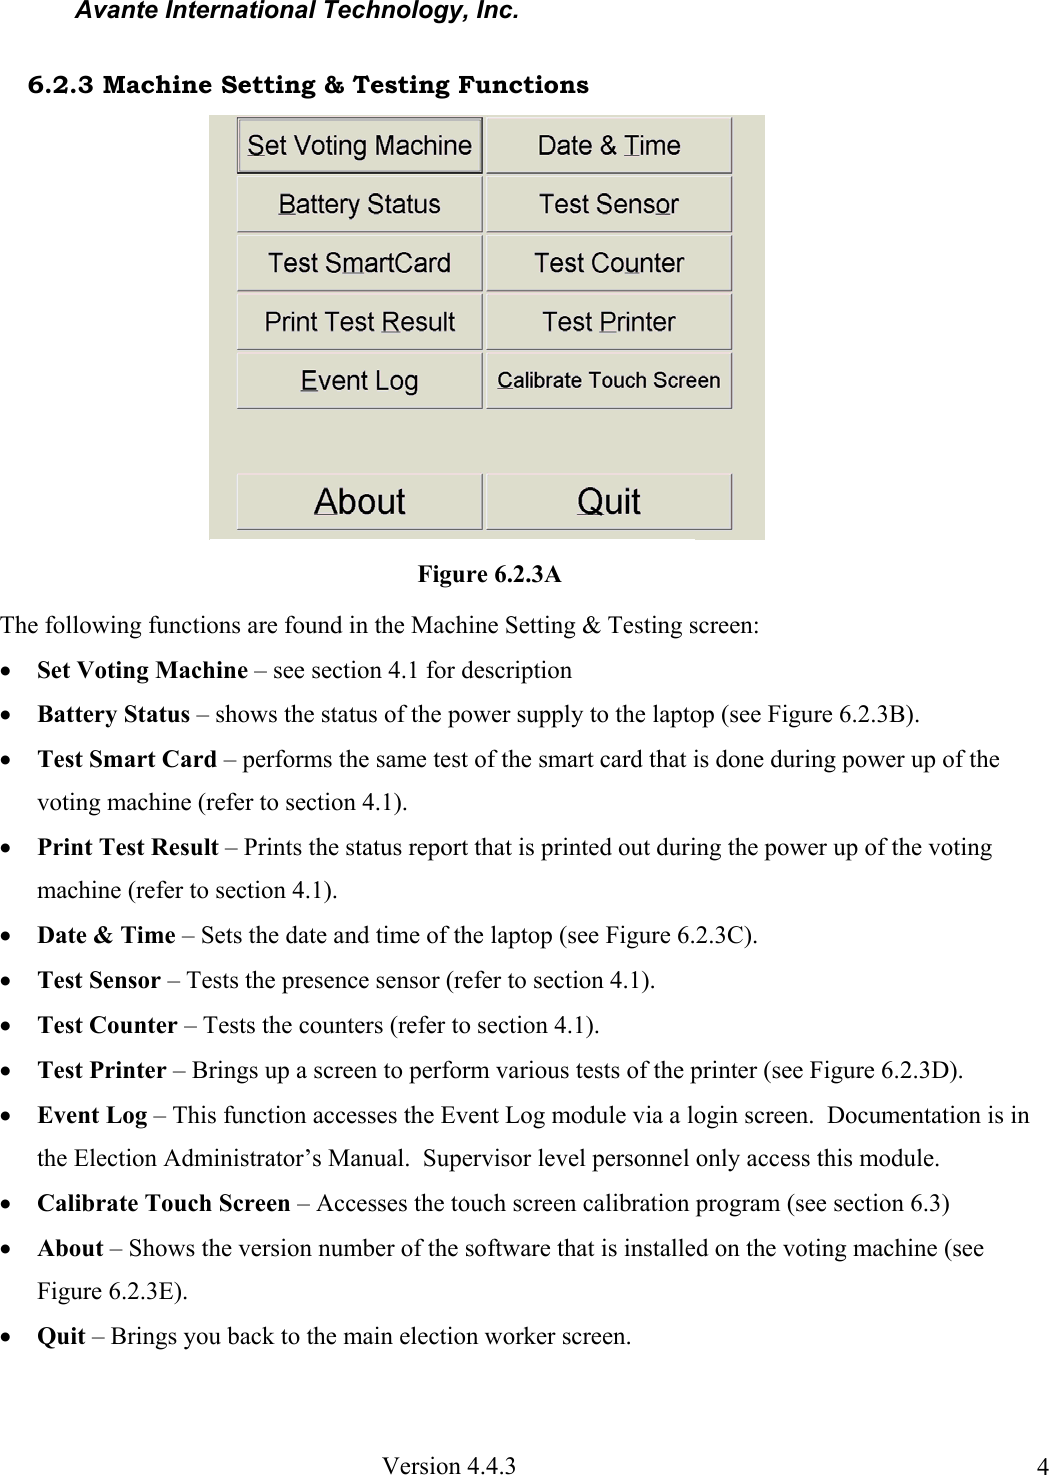 Avante International Technology, Inc.  Version 4.4.3  46.2.3 Machine Setting &amp; Testing Functions The following functions are found in the Machine Setting &amp; Testing screen: • Set Voting Machine – see section 4.1 for description • Battery Status – shows the status of the power supply to the laptop (see Figure 6.2.3B).   • Test Smart Card – performs the same test of the smart card that is done during power up of the voting machine (refer to section 4.1). • Print Test Result – Prints the status report that is printed out during the power up of the voting machine (refer to section 4.1).   • Date &amp; Time – Sets the date and time of the laptop (see Figure 6.2.3C).   • Test Sensor – Tests the presence sensor (refer to section 4.1). • Test Counter – Tests the counters (refer to section 4.1). • Test Printer – Brings up a screen to perform various tests of the printer (see Figure 6.2.3D).   • Event Log – This function accesses the Event Log module via a login screen.  Documentation is in the Election Administrator’s Manual.  Supervisor level personnel only access this module.   • Calibrate Touch Screen – Accesses the touch screen calibration program (see section 6.3) • About – Shows the version number of the software that is installed on the voting machine (see Figure 6.2.3E).   • Quit – Brings you back to the main election worker screen.    Figure 6.2.3A 